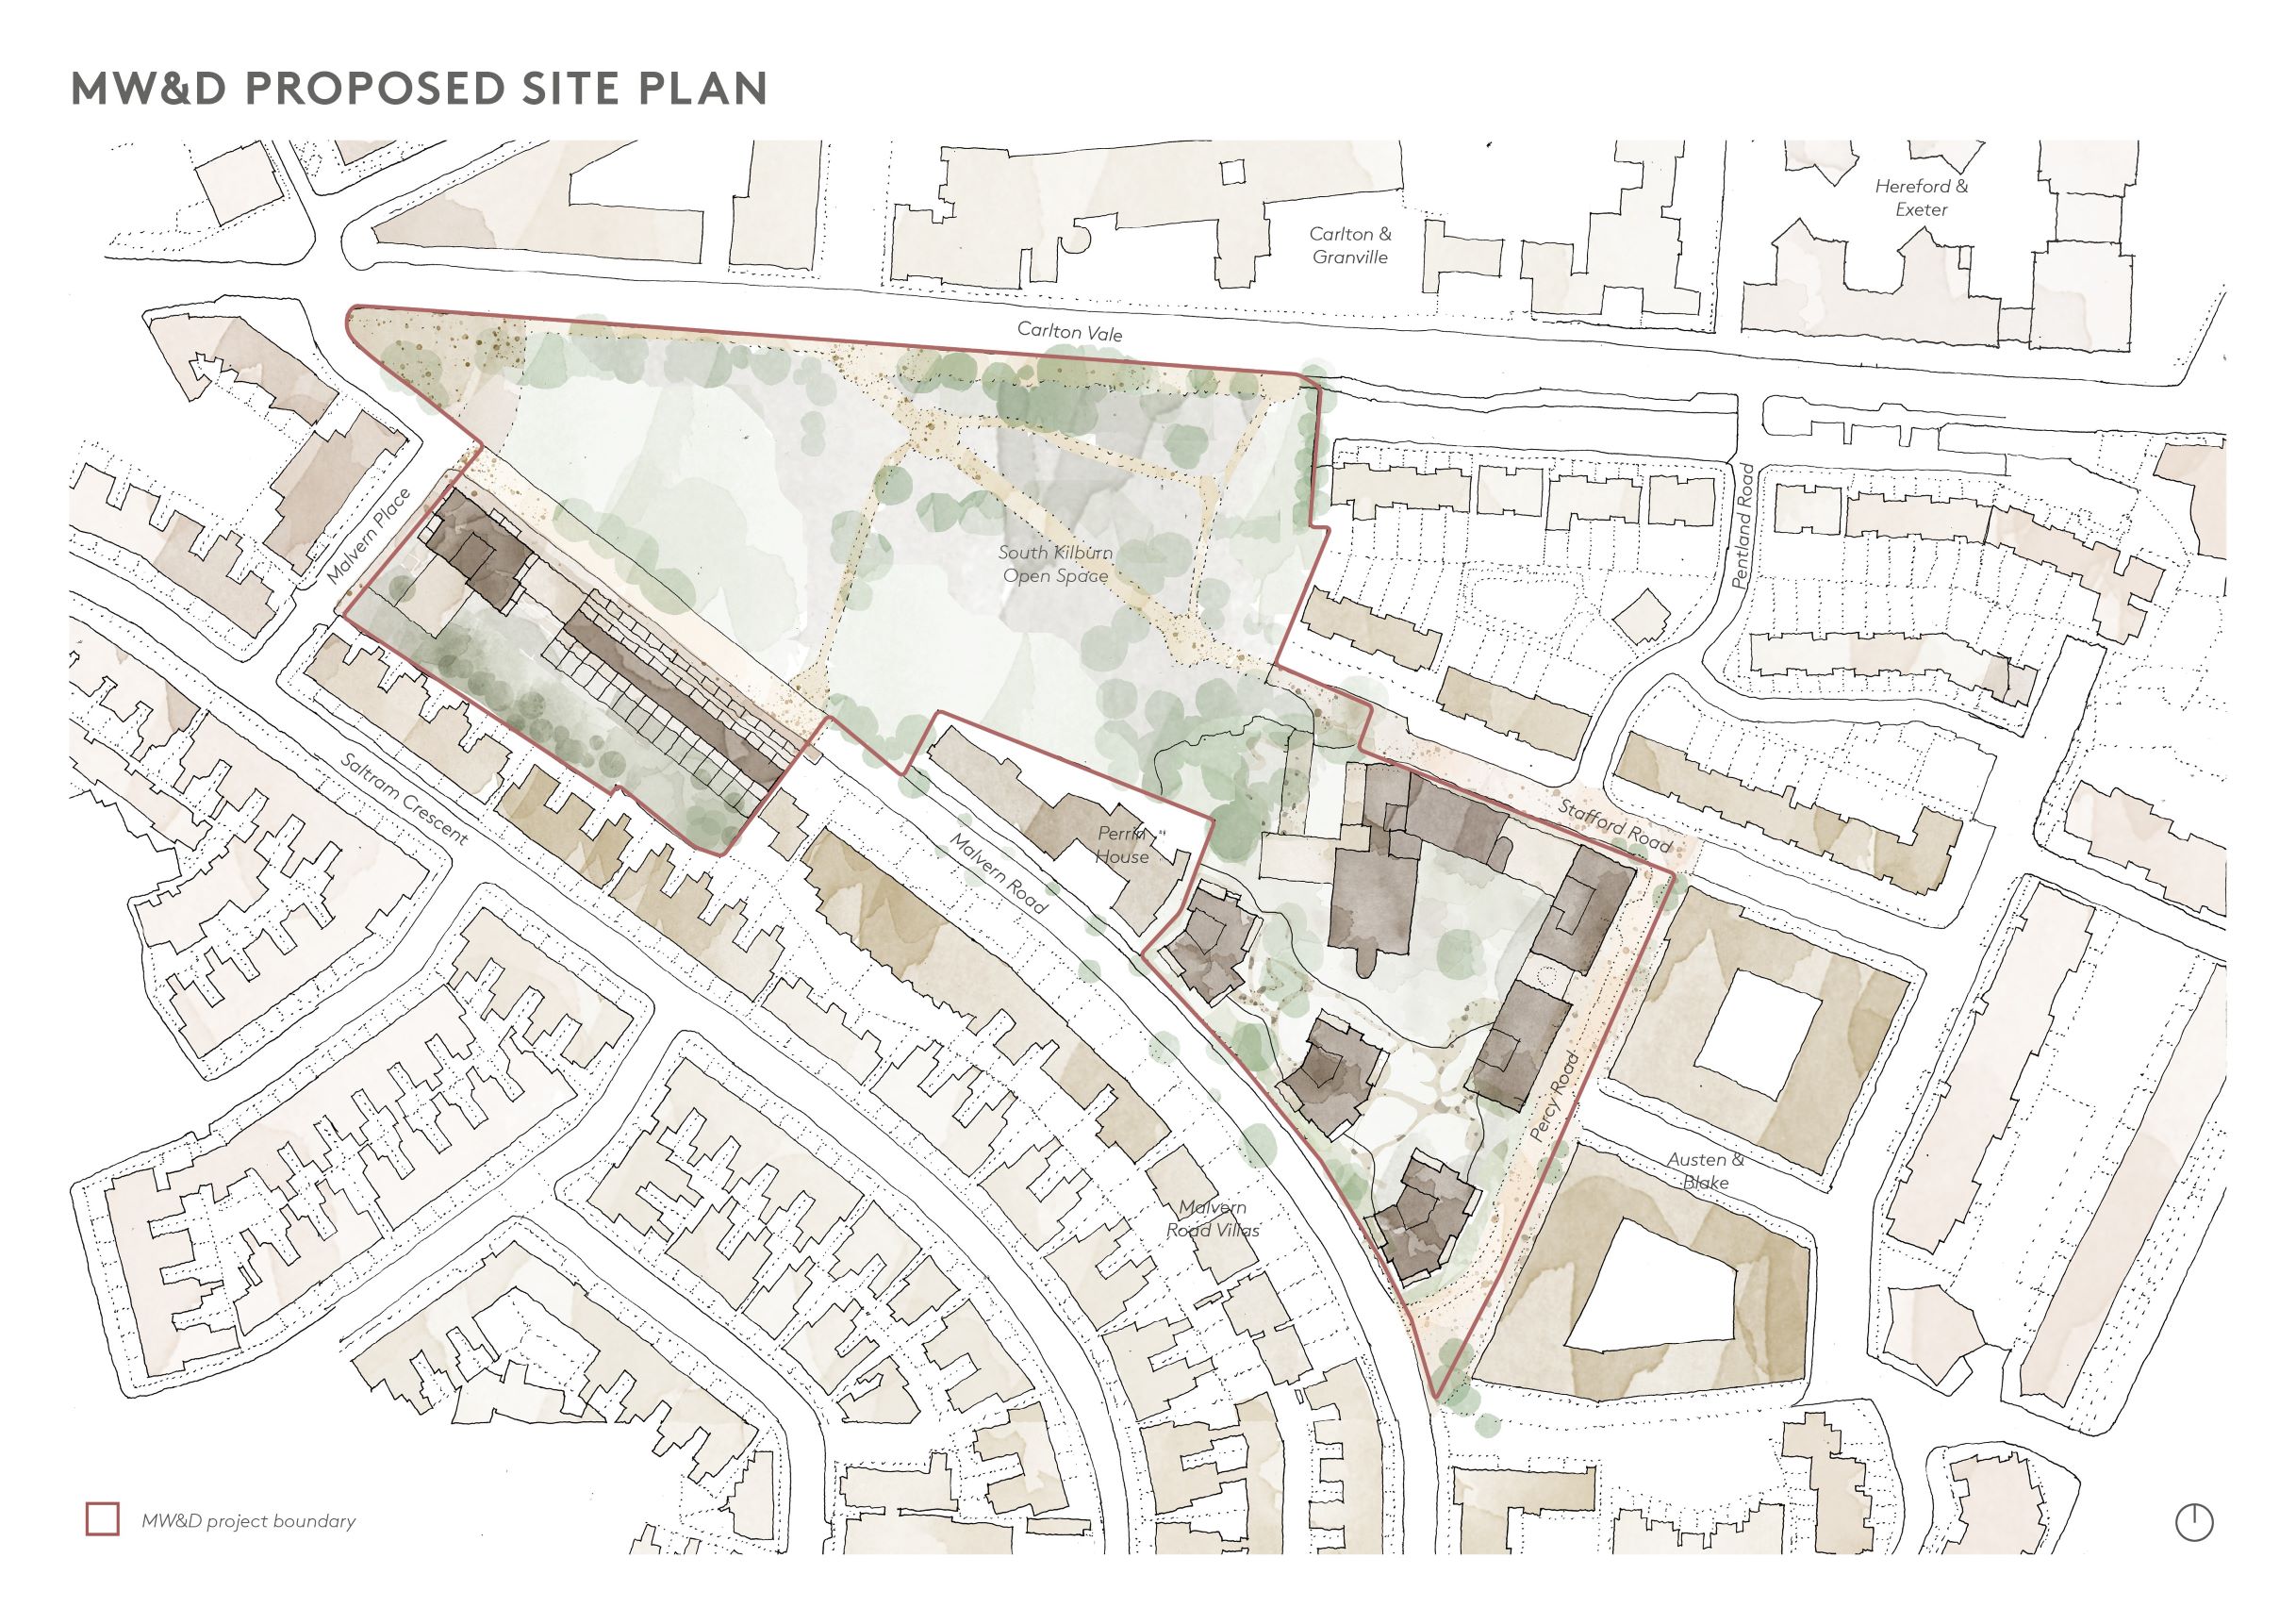 Masefield House, Wordsworth House, Dickens House proposed site plan